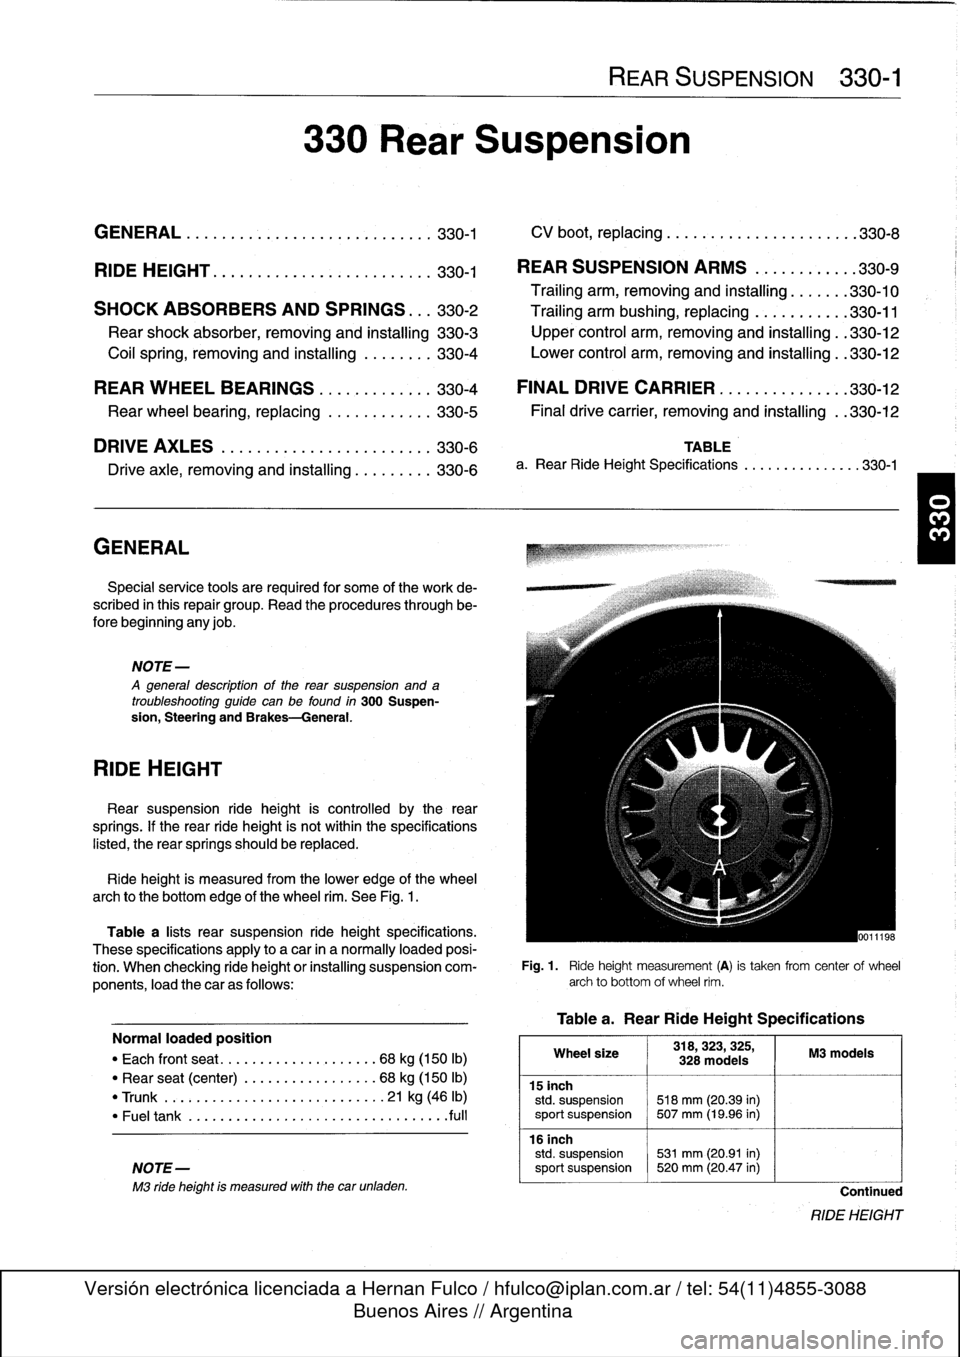 BMW 328i 1994 E36 Owners Guide 
GENERAL
.......
.
.
.
.
.
.
.
.
.
.......
.
...
.330-1

	

CV
boot,
replacing
........
.
.
.
.........
.
.330-8

RIDE
HEIGHT
....
.
.
.
.
.
...
.
...
.
.
.
.
.
...
.
330-1

	

REAR
SUSPENSION
ARMS
.
